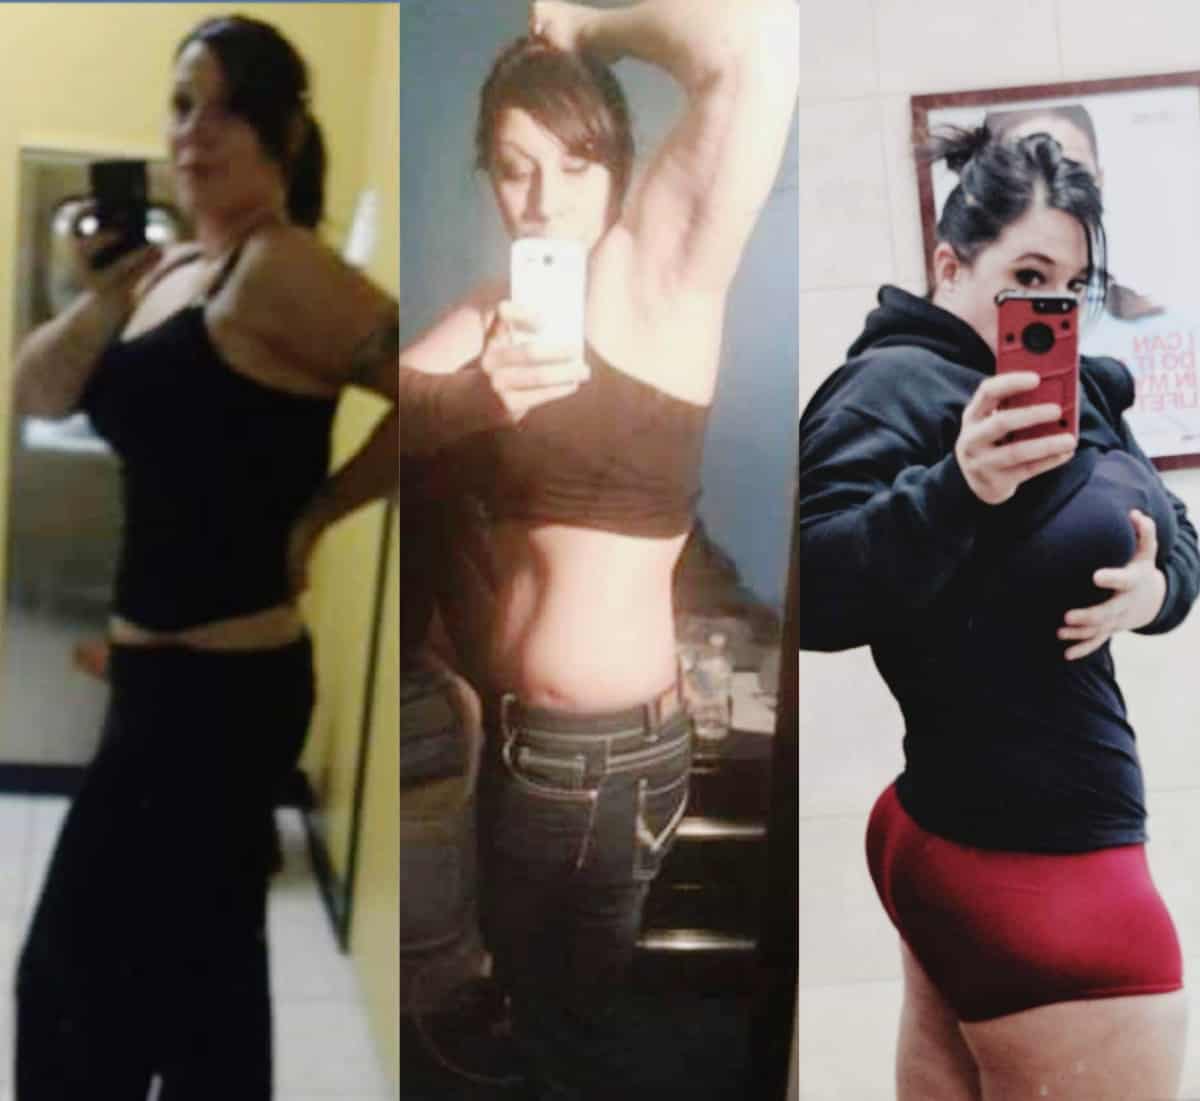 Tina J. in 3 photo collage of her weight loss transformation.